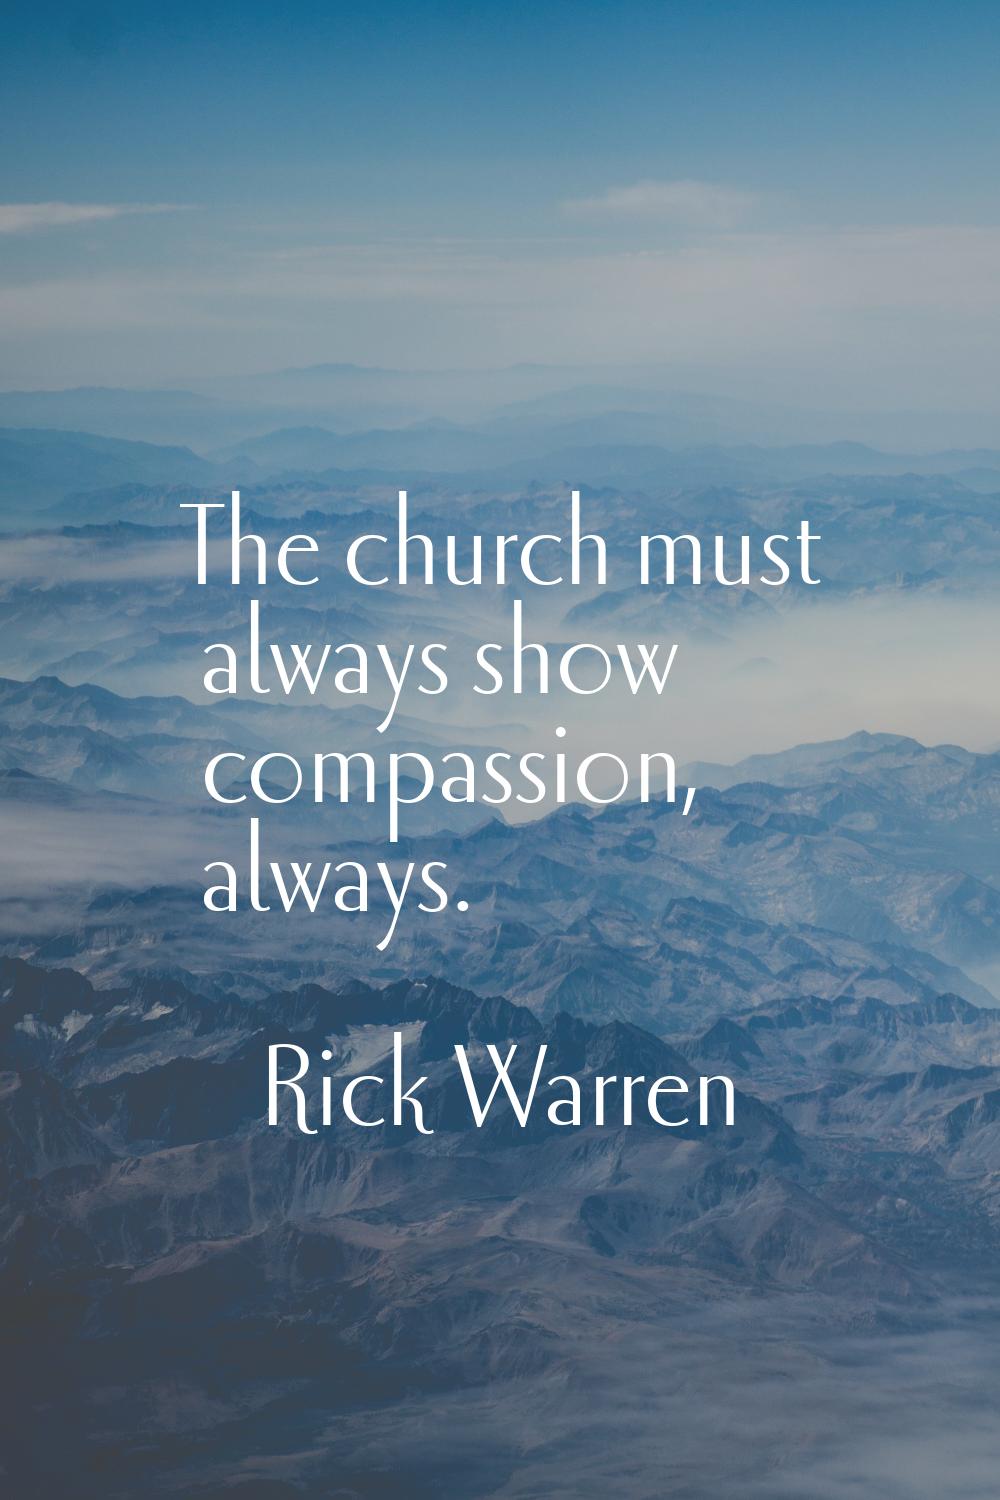 The church must always show compassion, always.